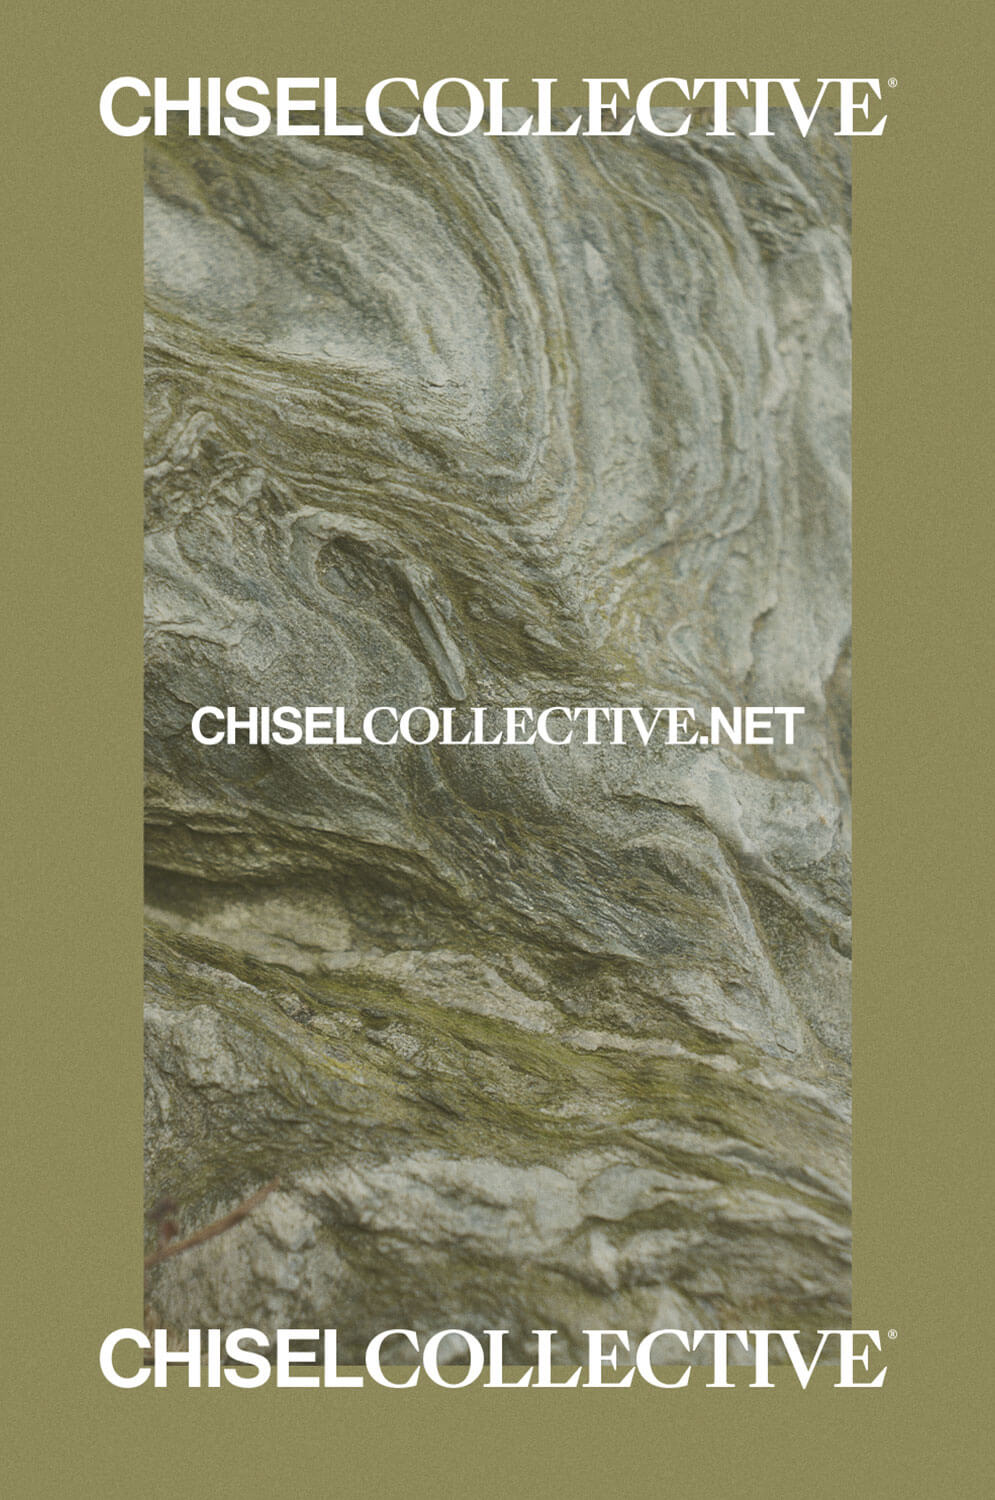 Chisel Collective